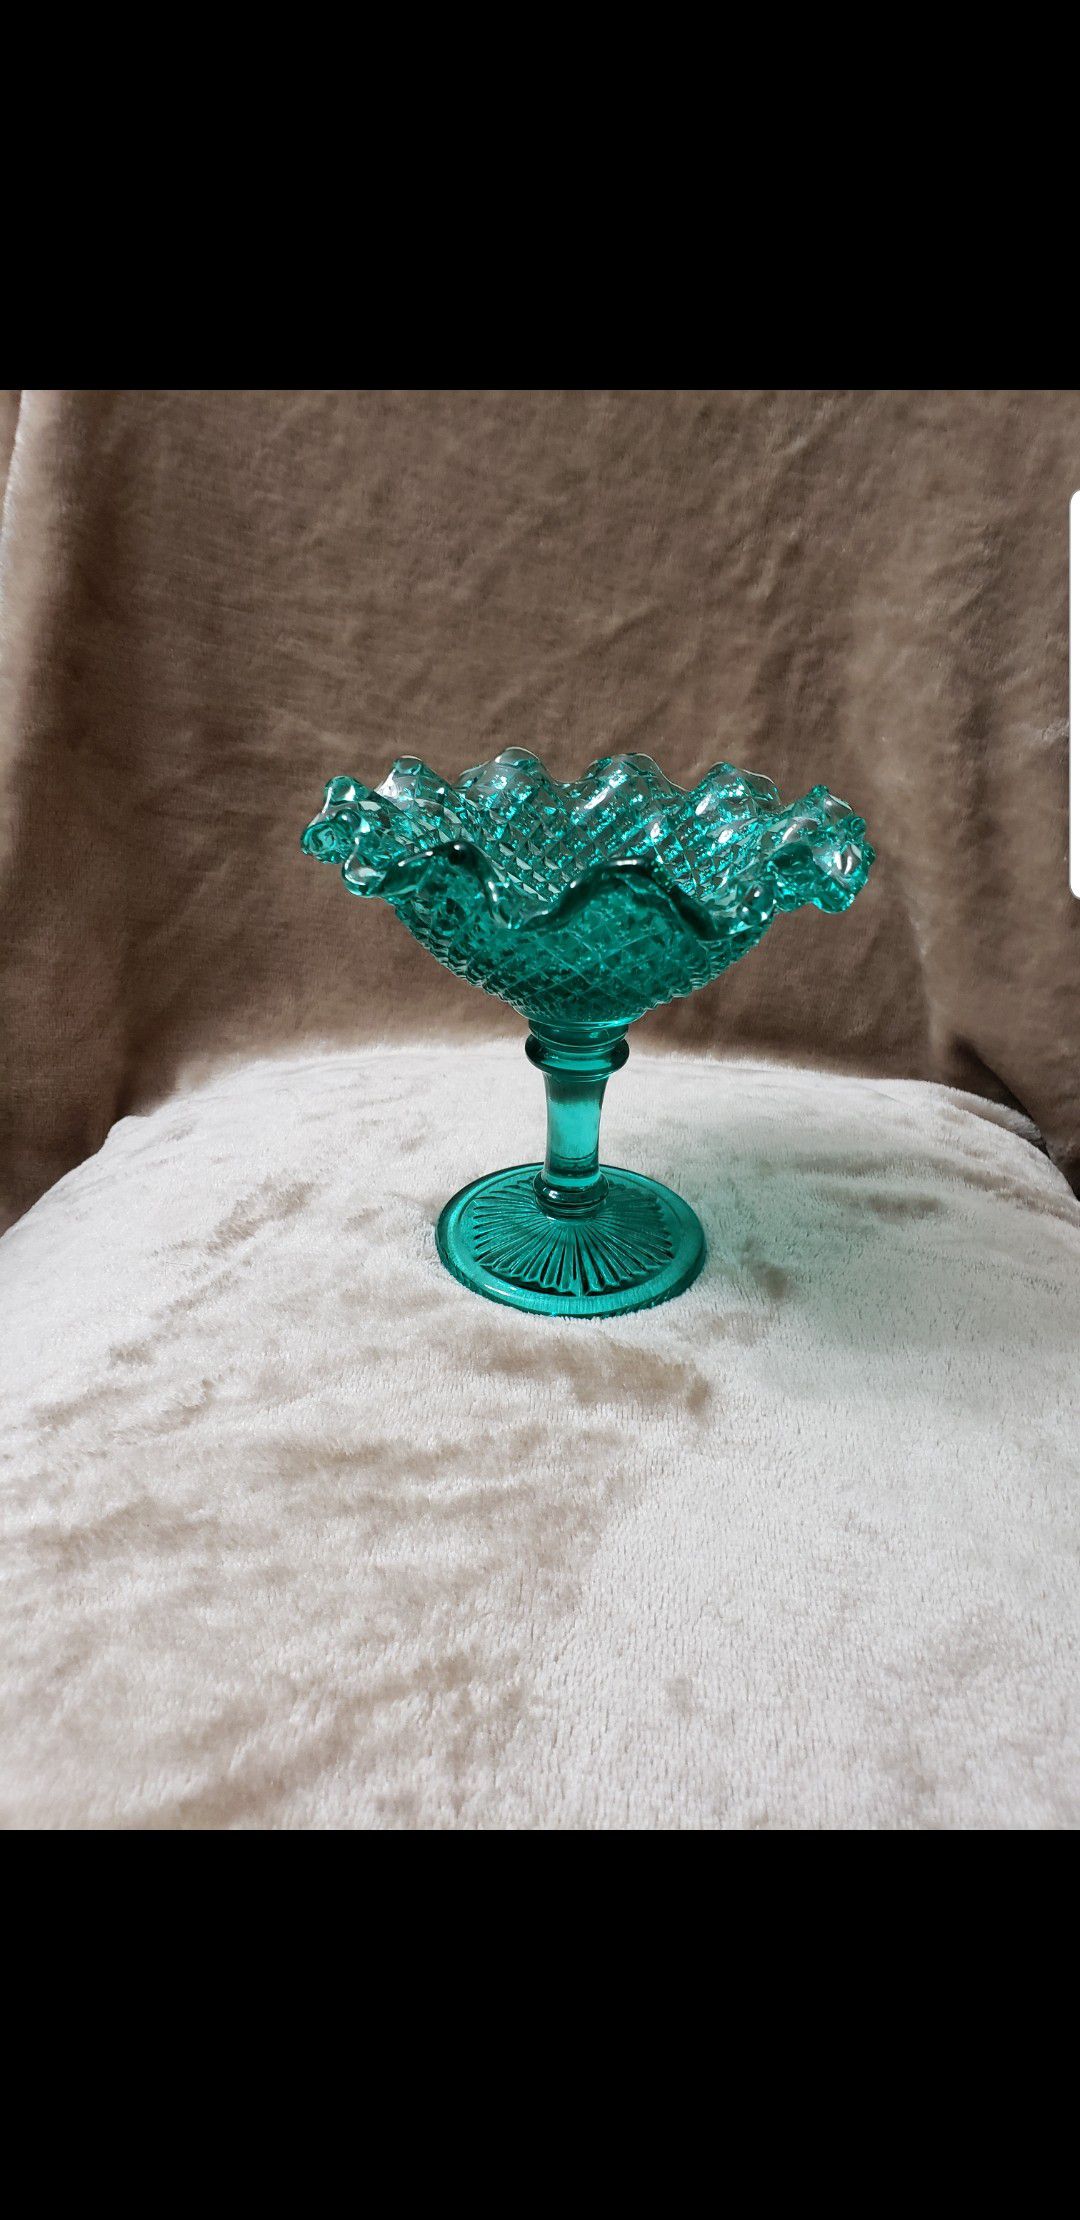 Vintage Teal compote/candy dish